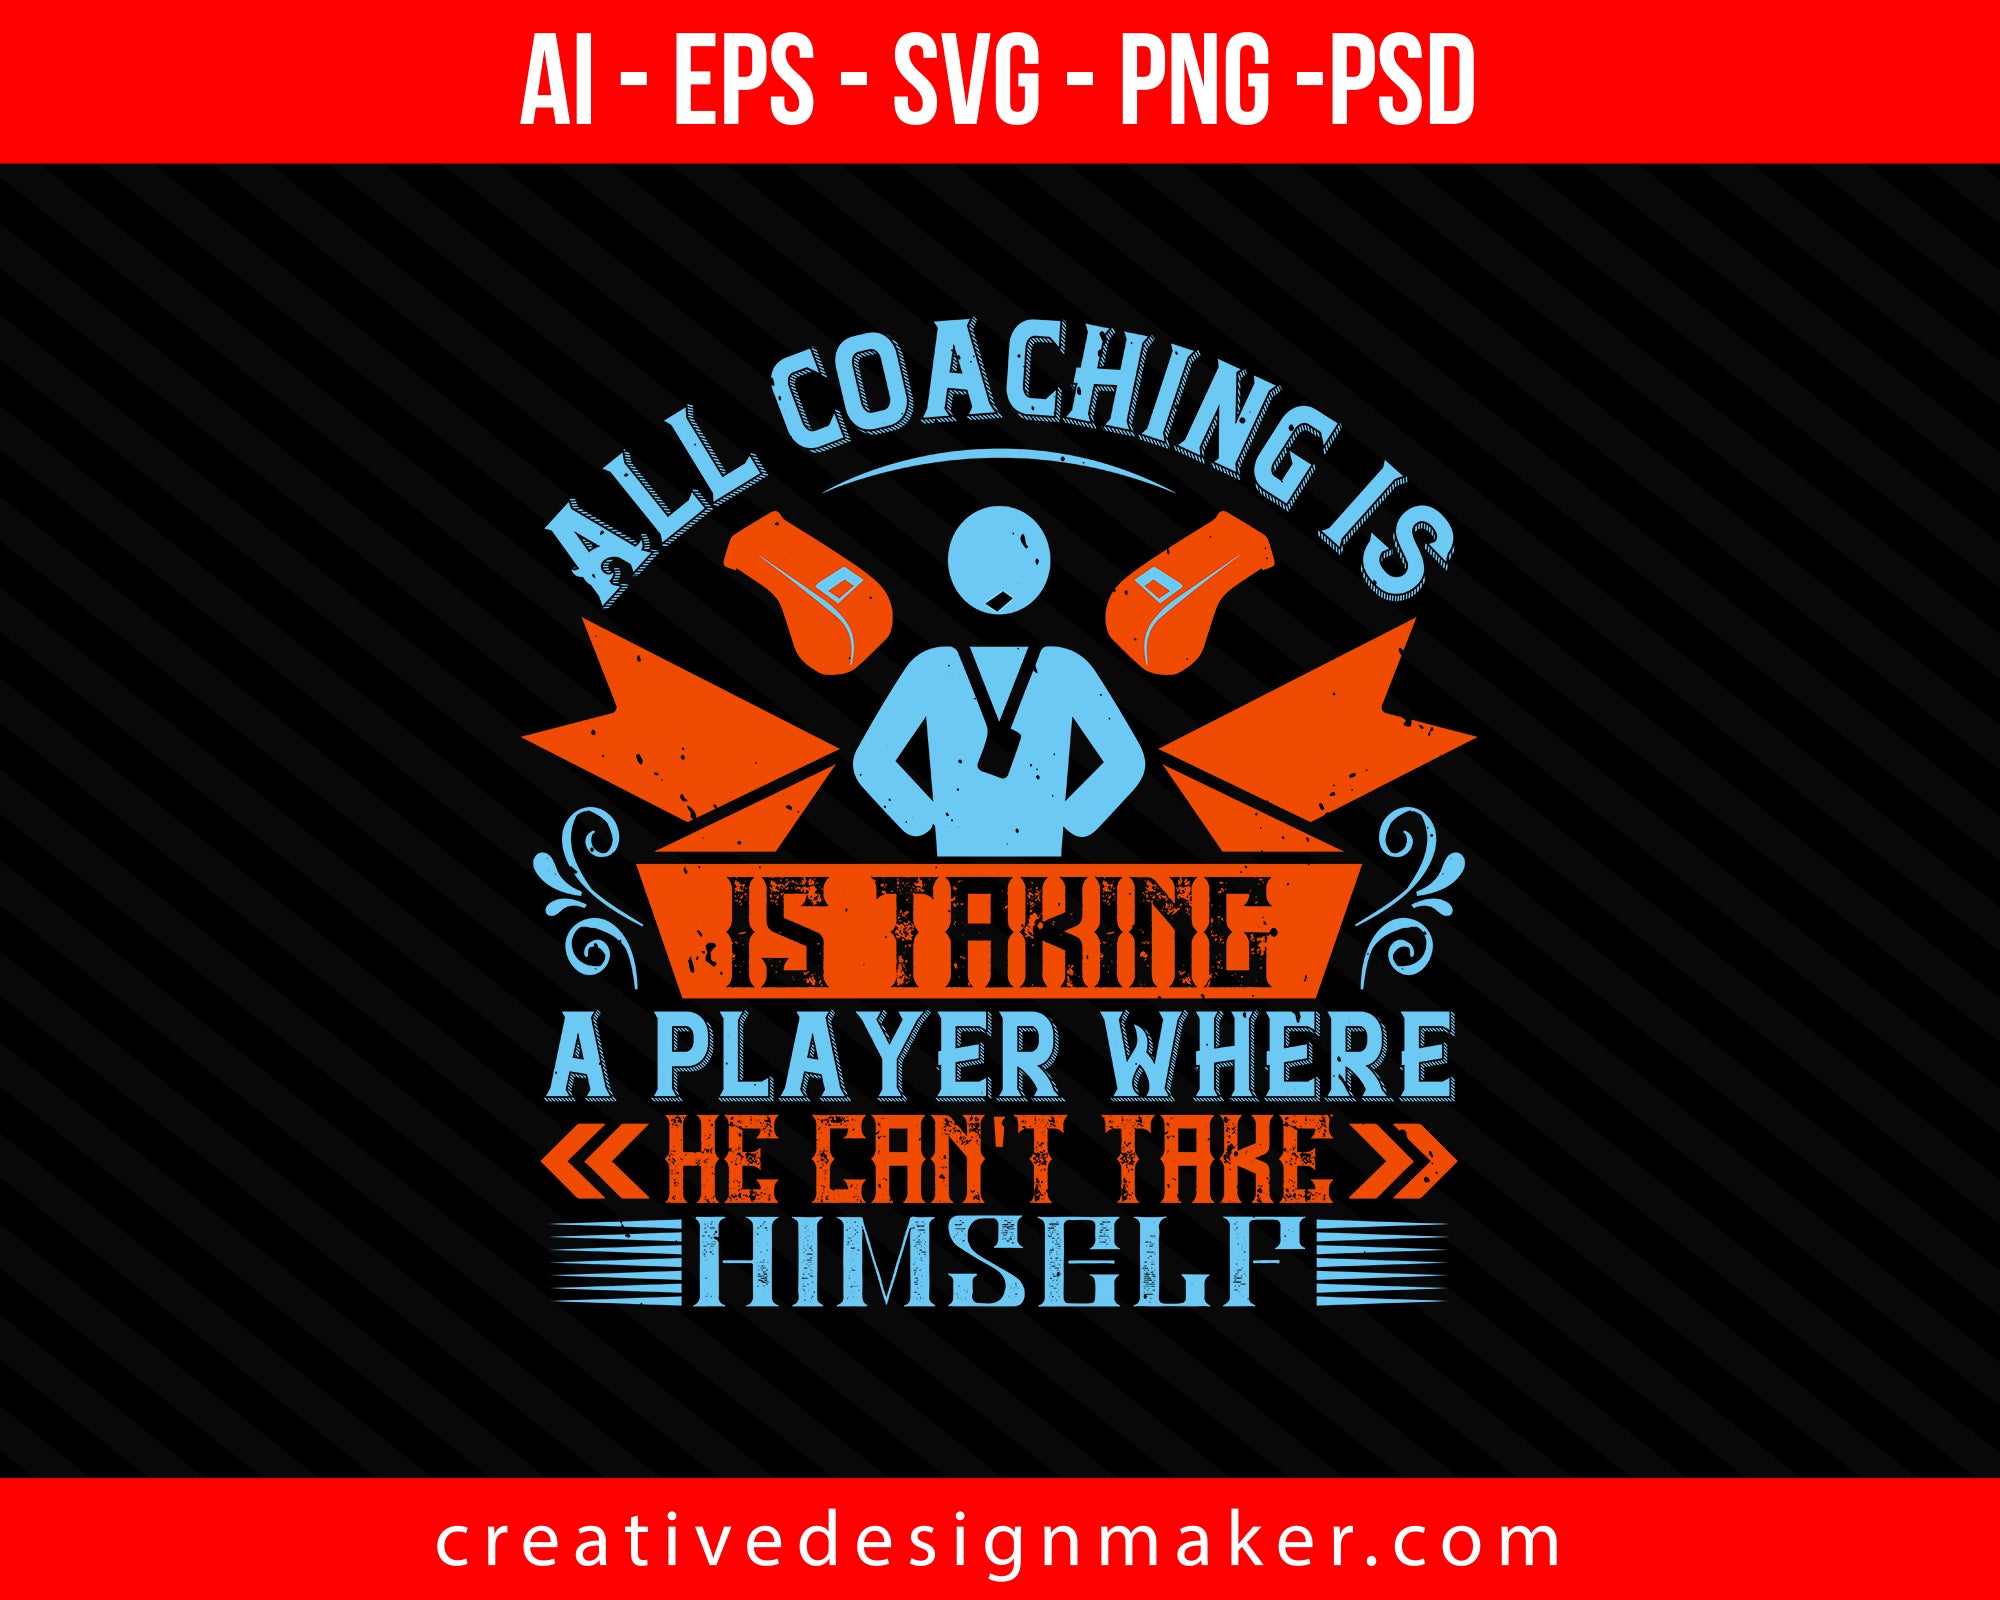 All coaching is, is taking a player where he can't take himself Coaching Print Ready Editable T-Shirt SVG Design!